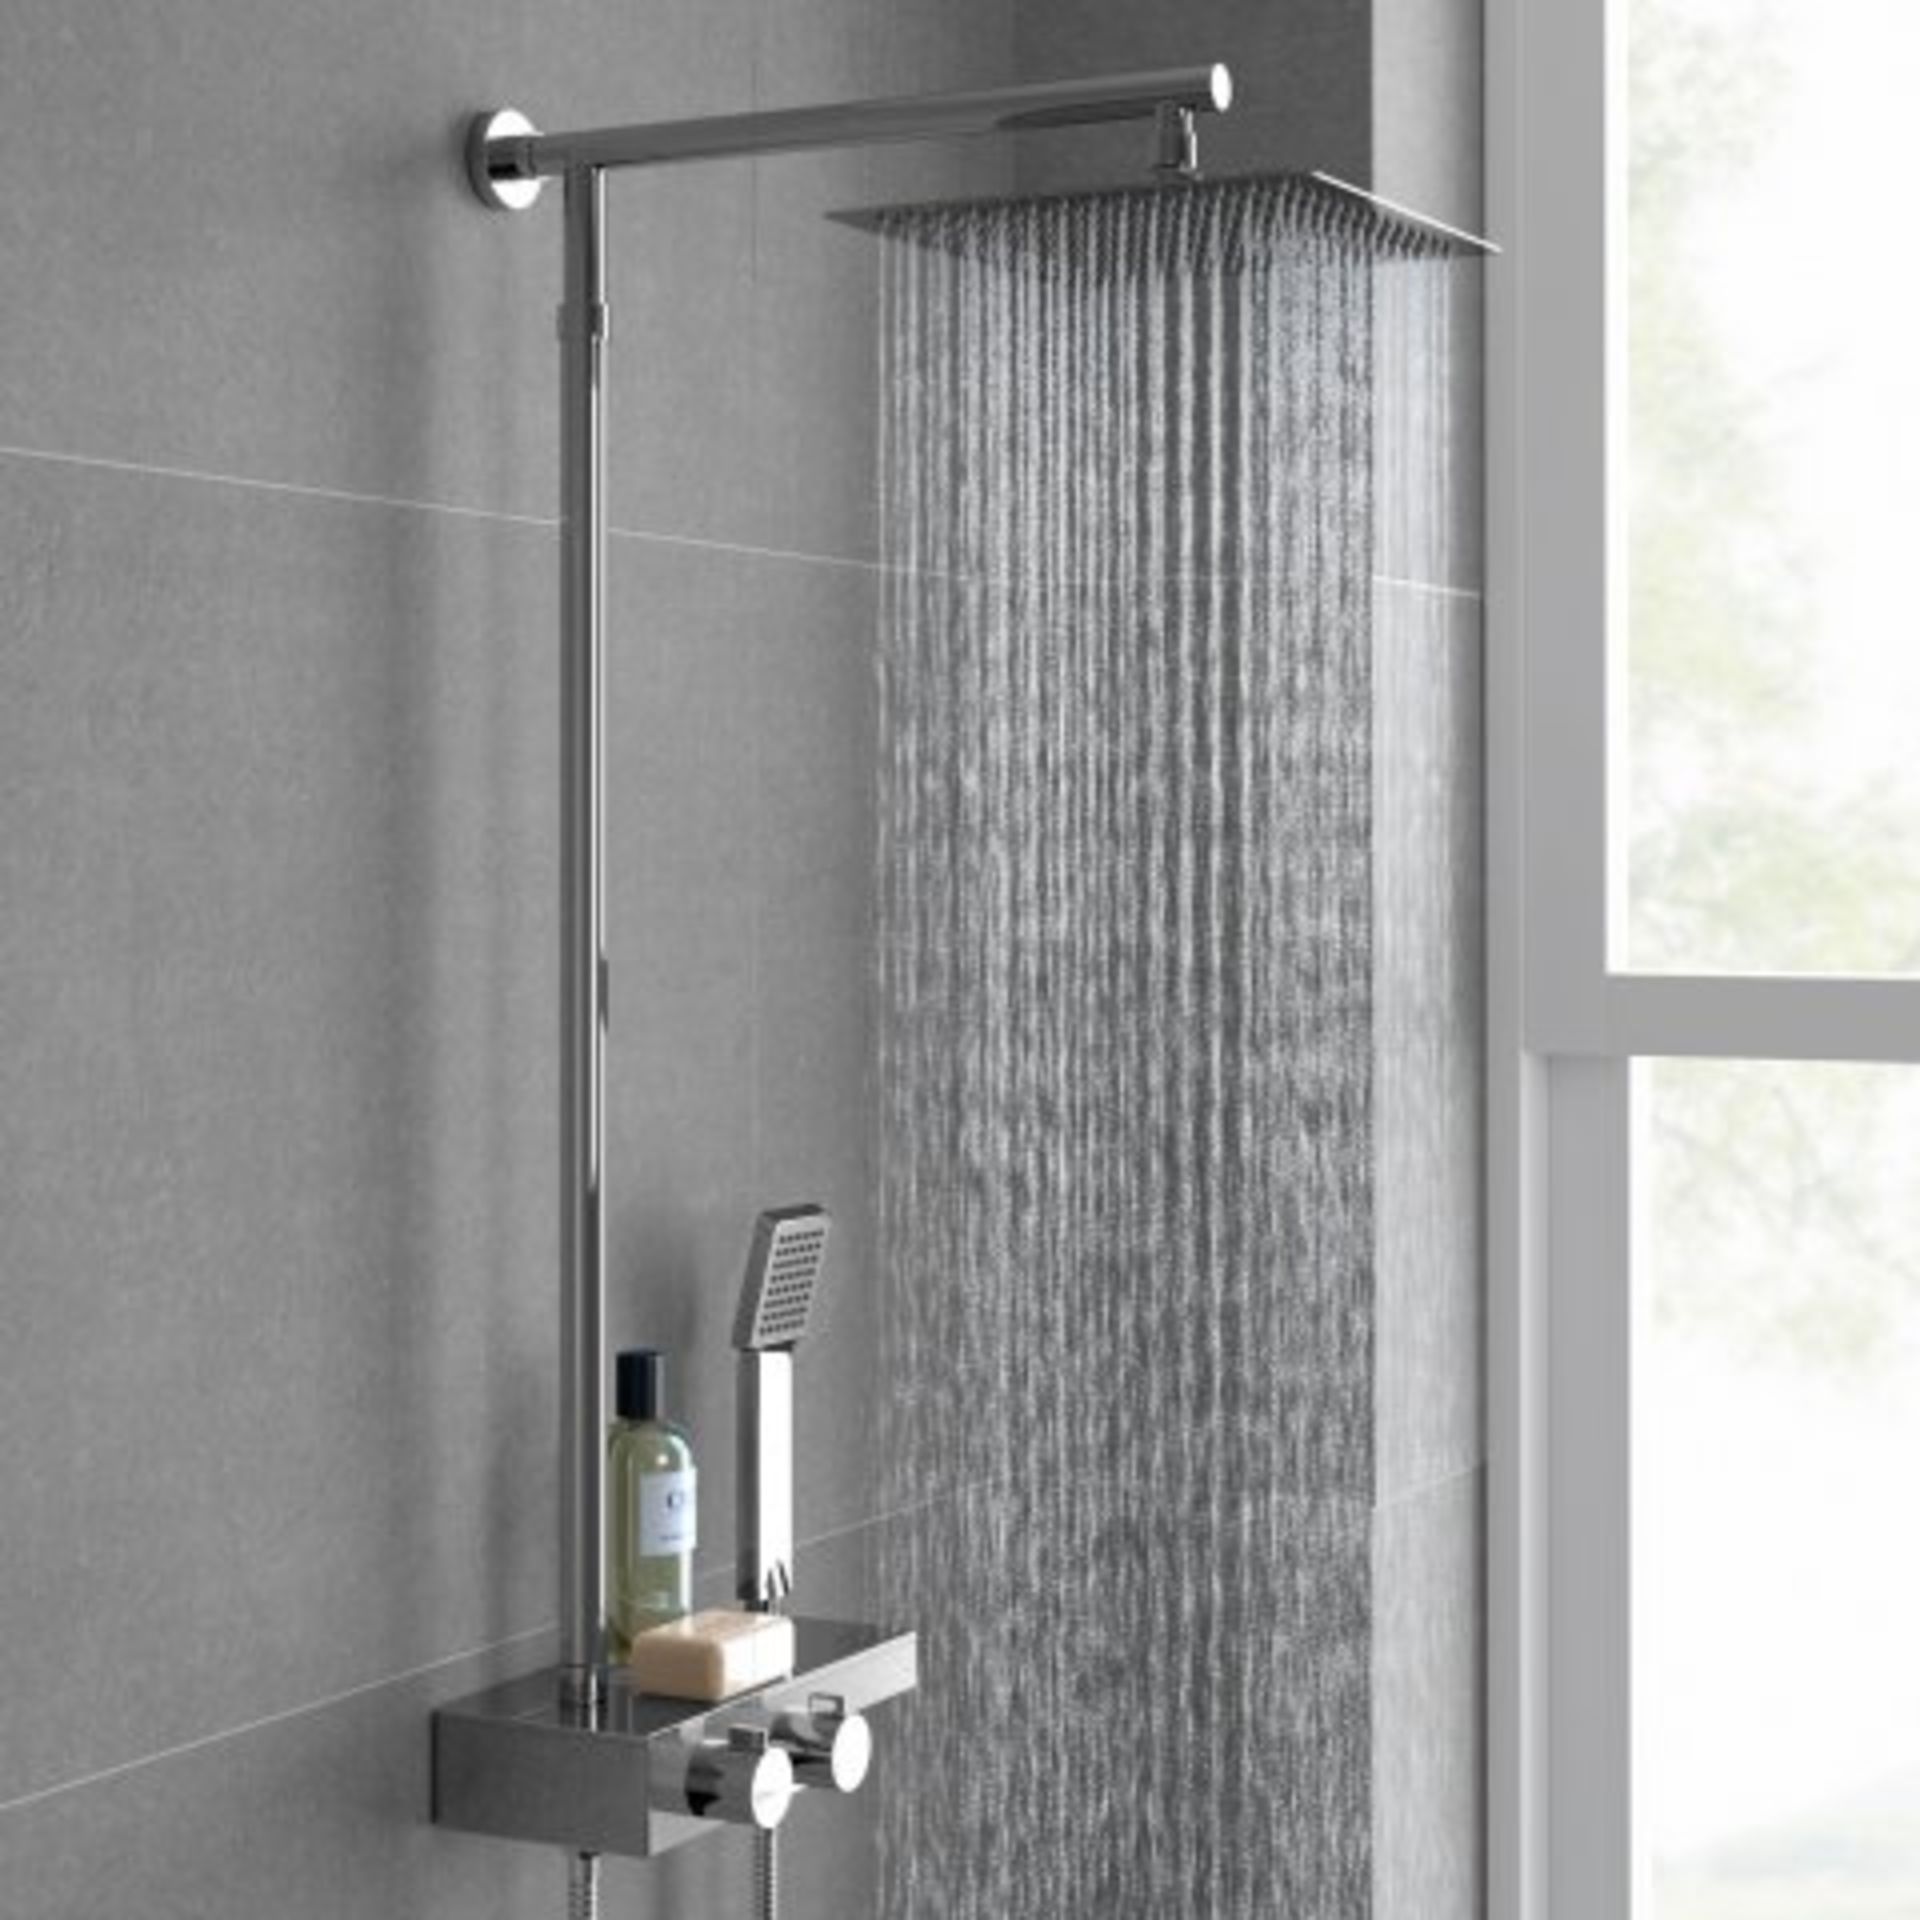 (T28) Thermostatic Exposed Shower Kit 250mm Square Head Handheld. RRP £349.99. Designer Style Our